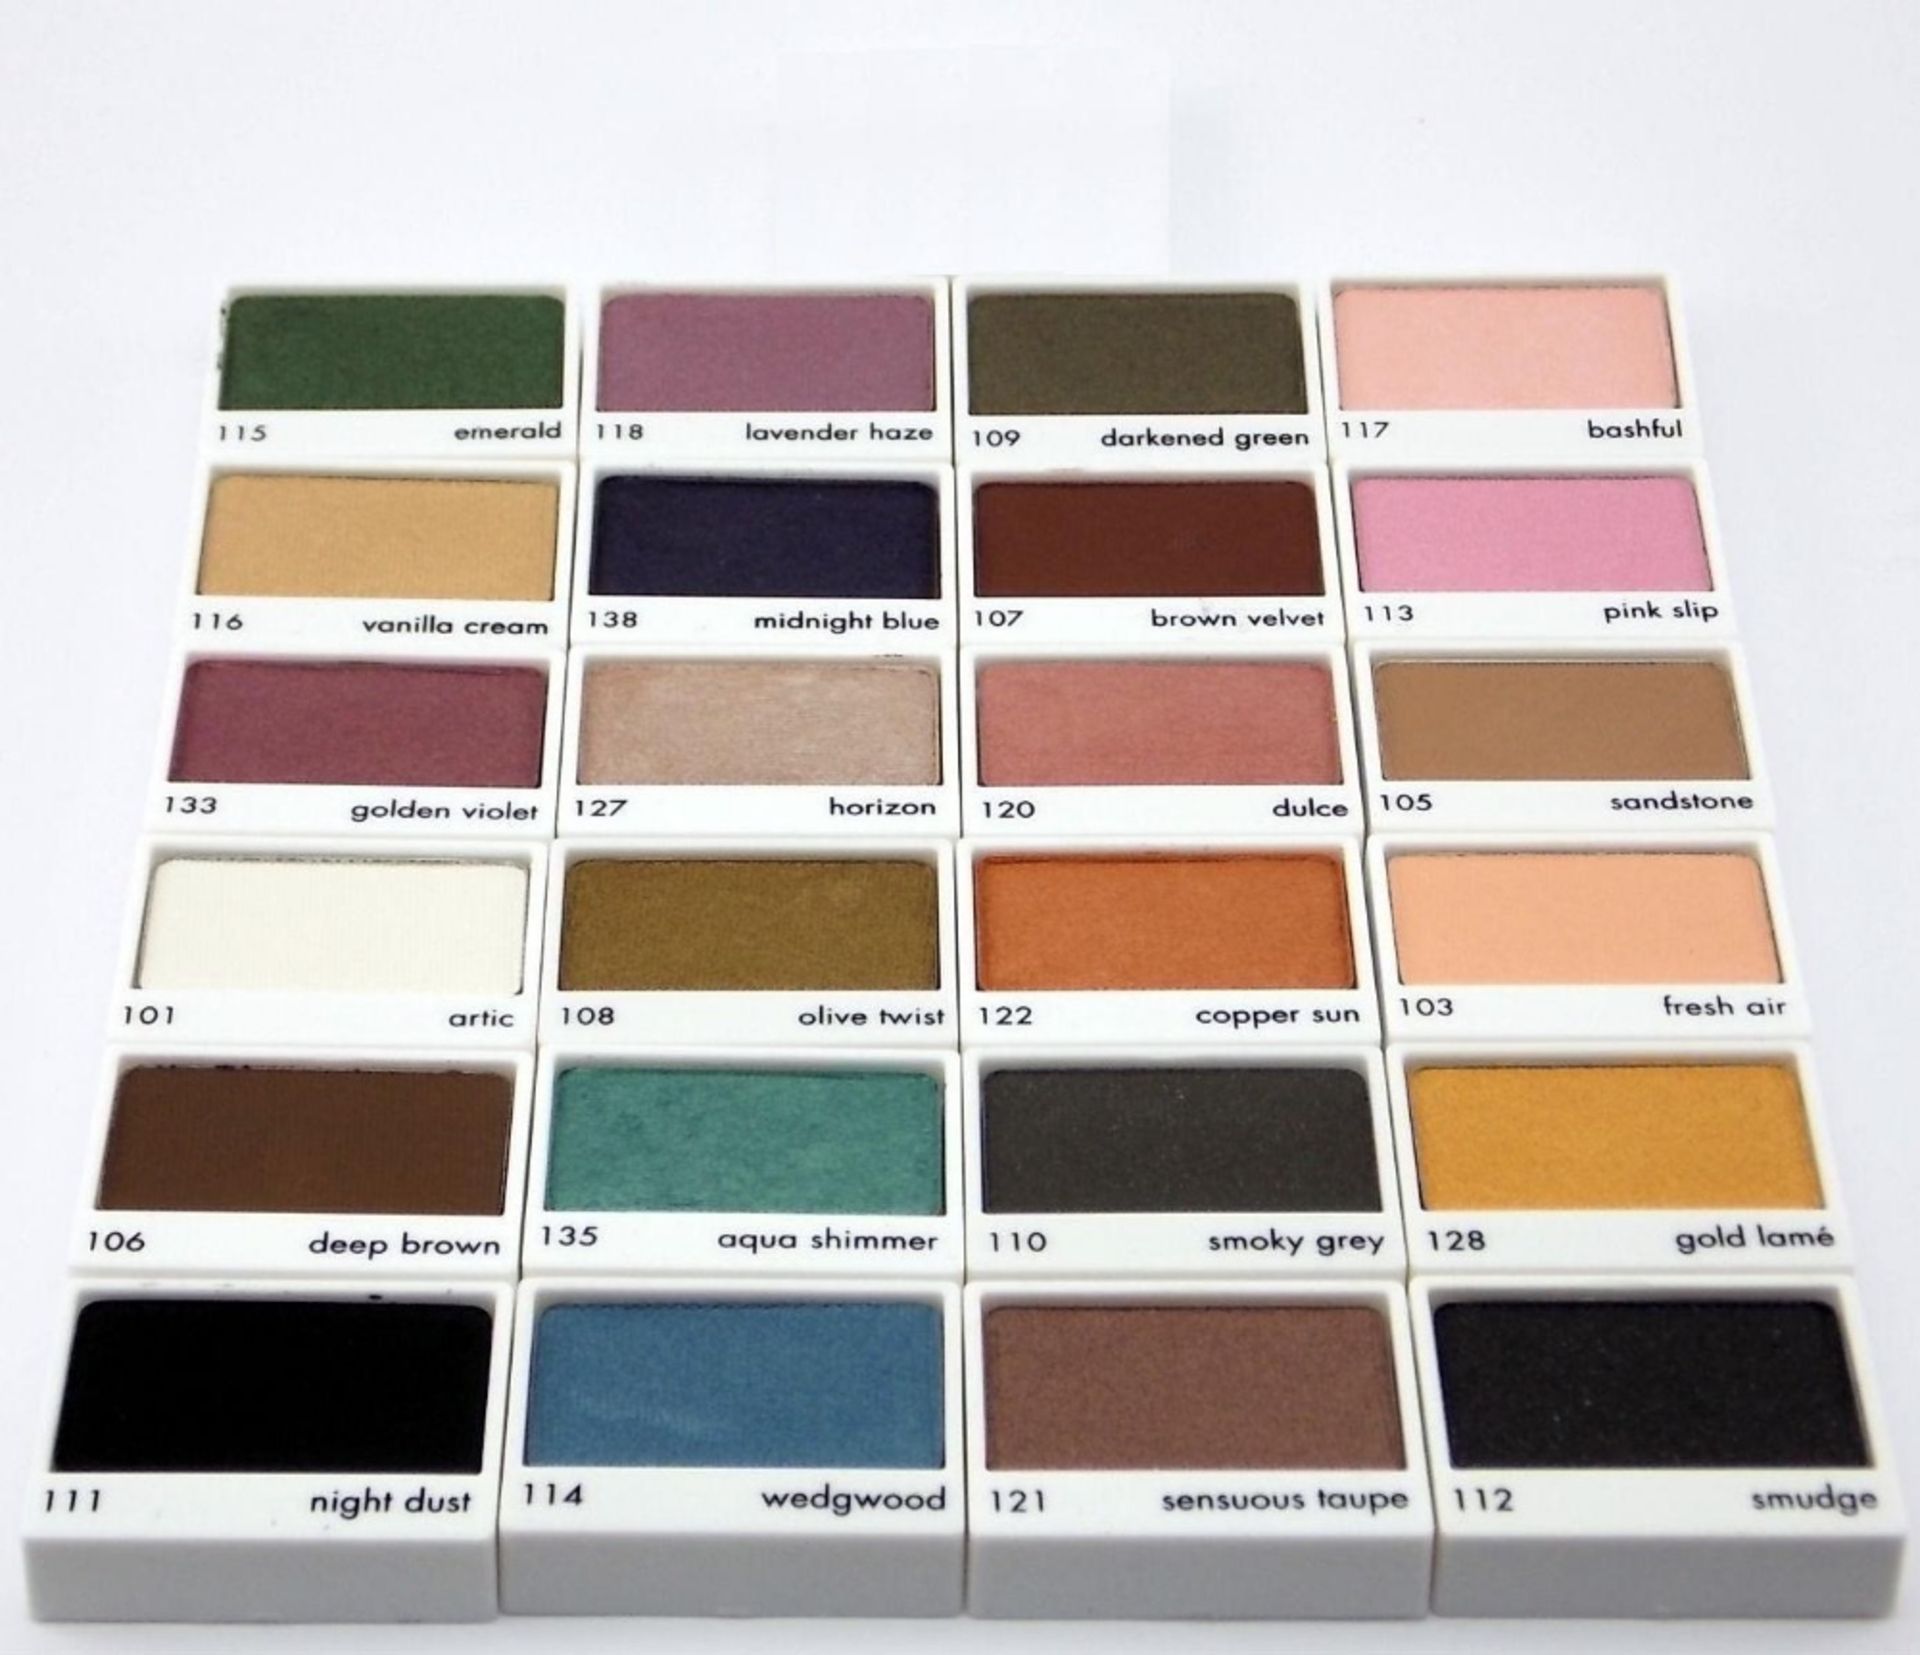 250  x ck Eyeshadows Testers – 5 Shades – Full Size Testers -UK Delivery £15 – NO VAT